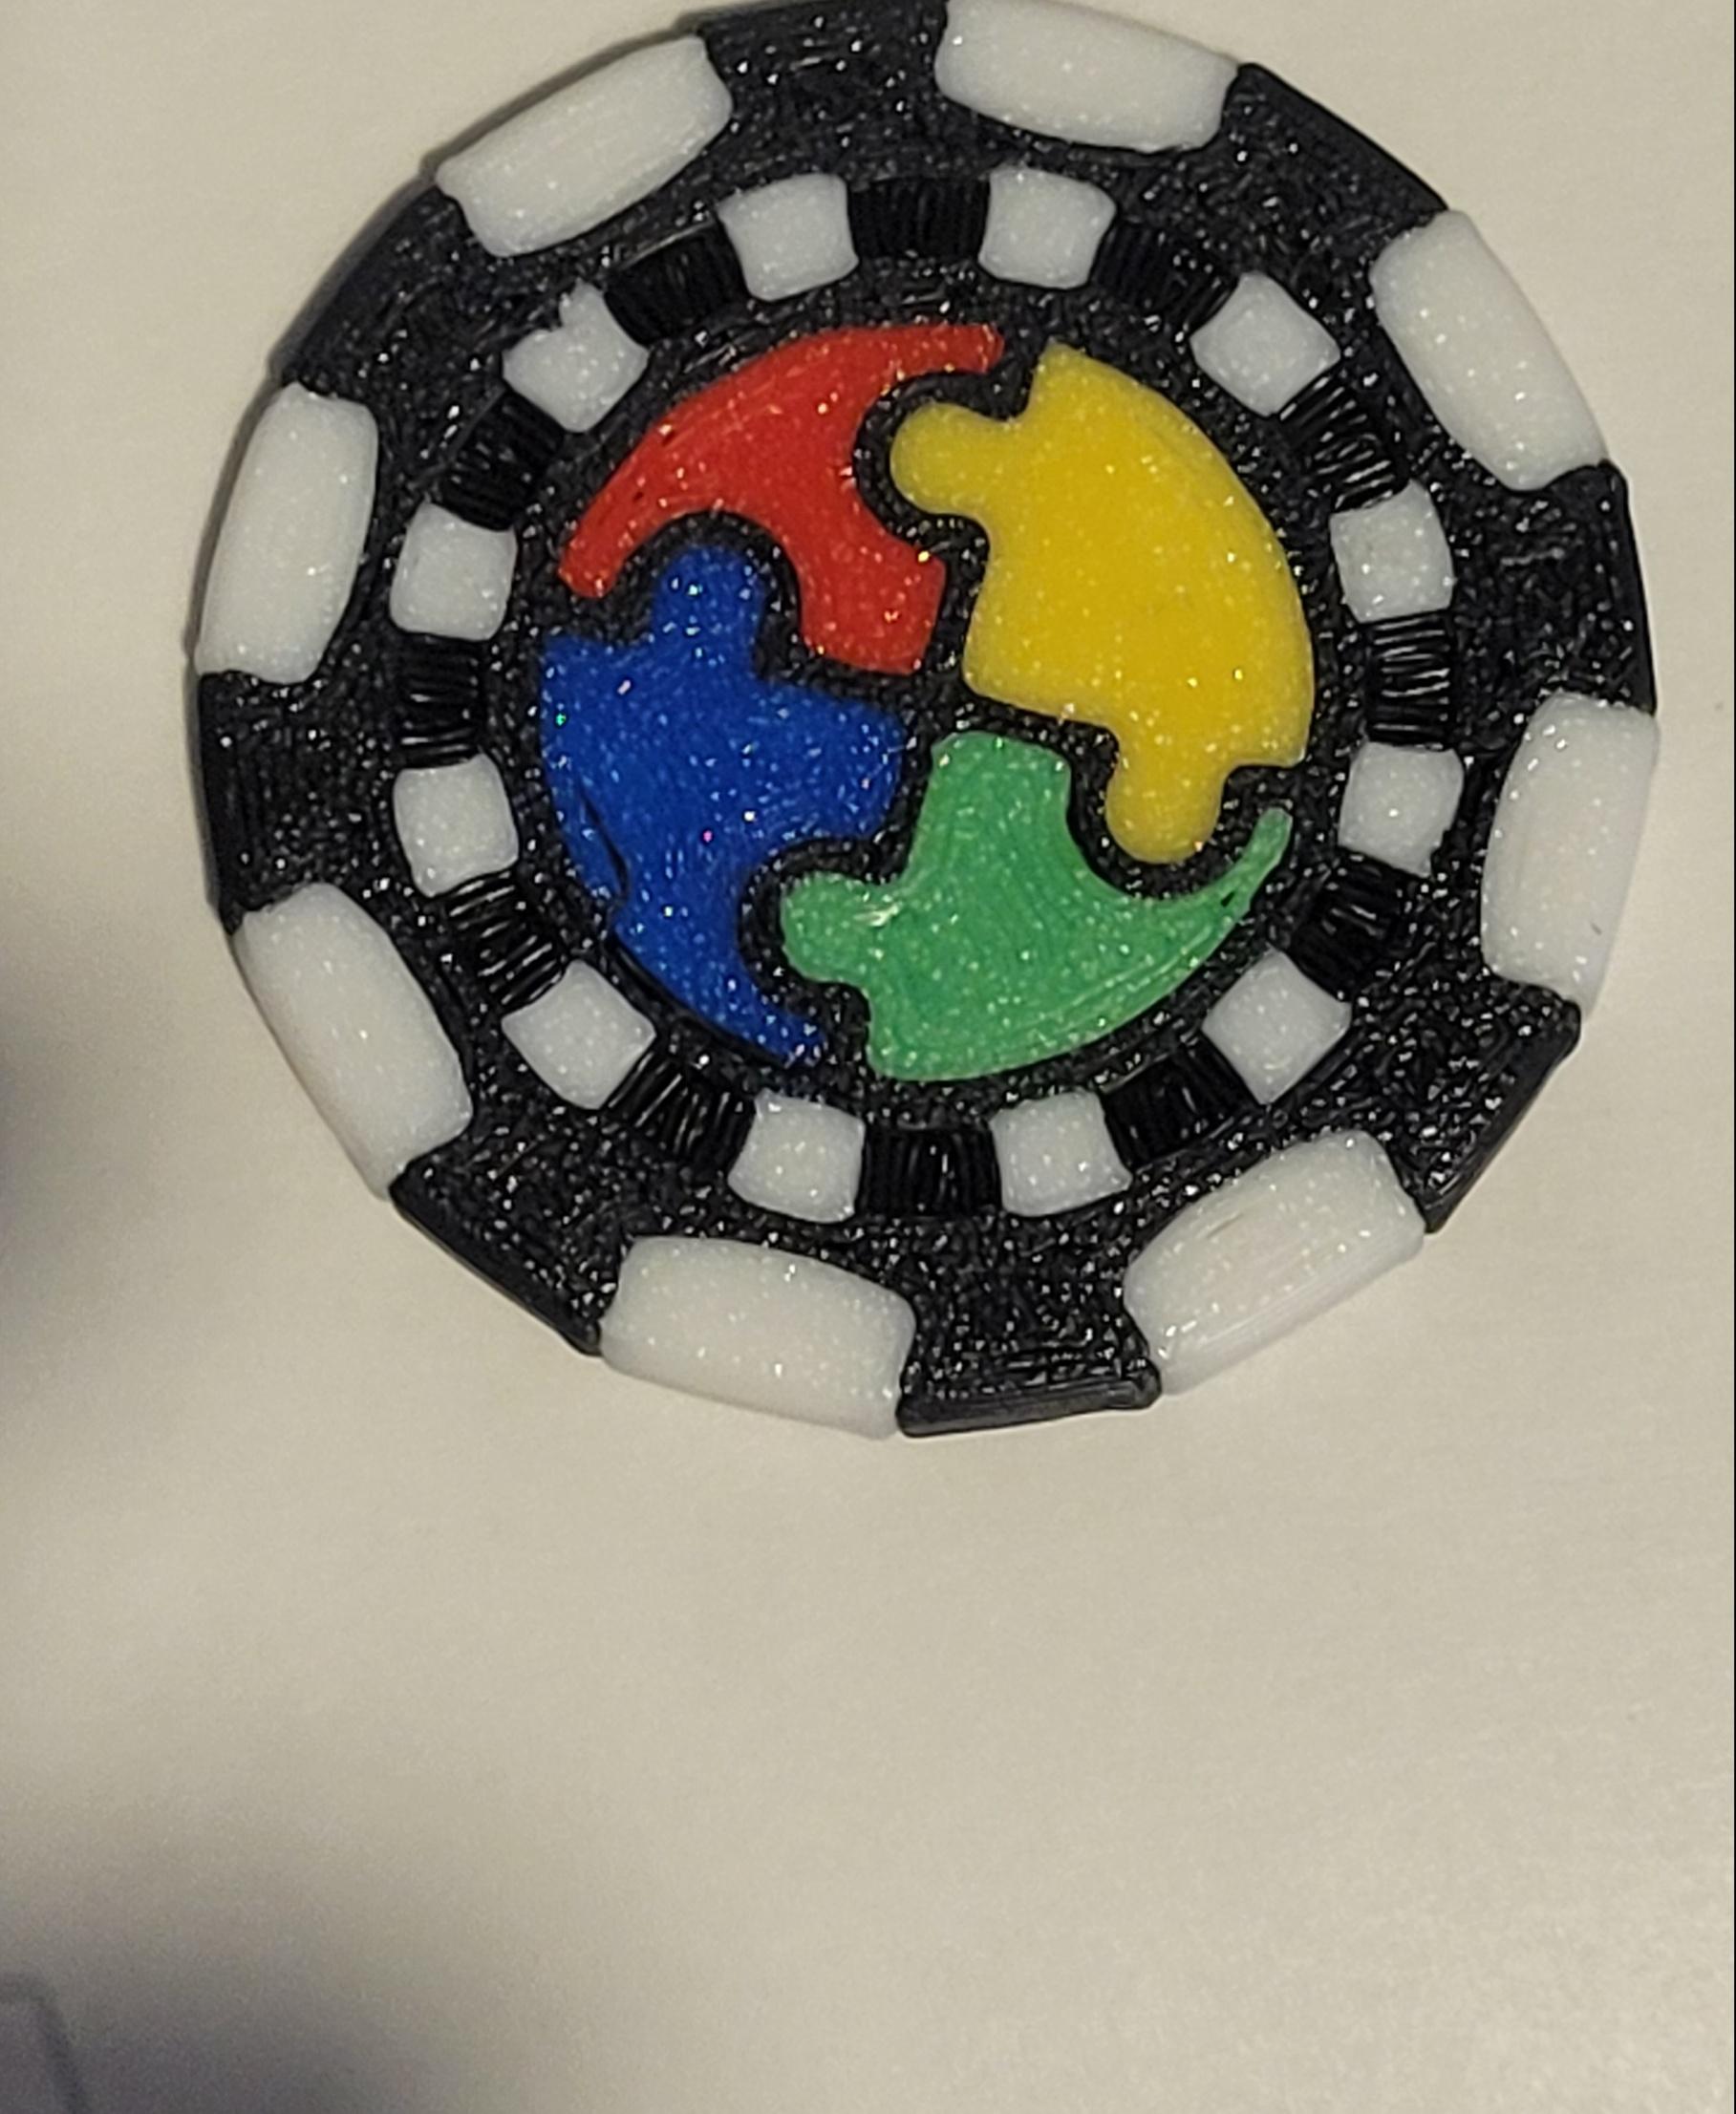 The New Maker Chip! A Maker coin that checks all the boxes! - my take on the poker chip......my autism family will love this - 3d model